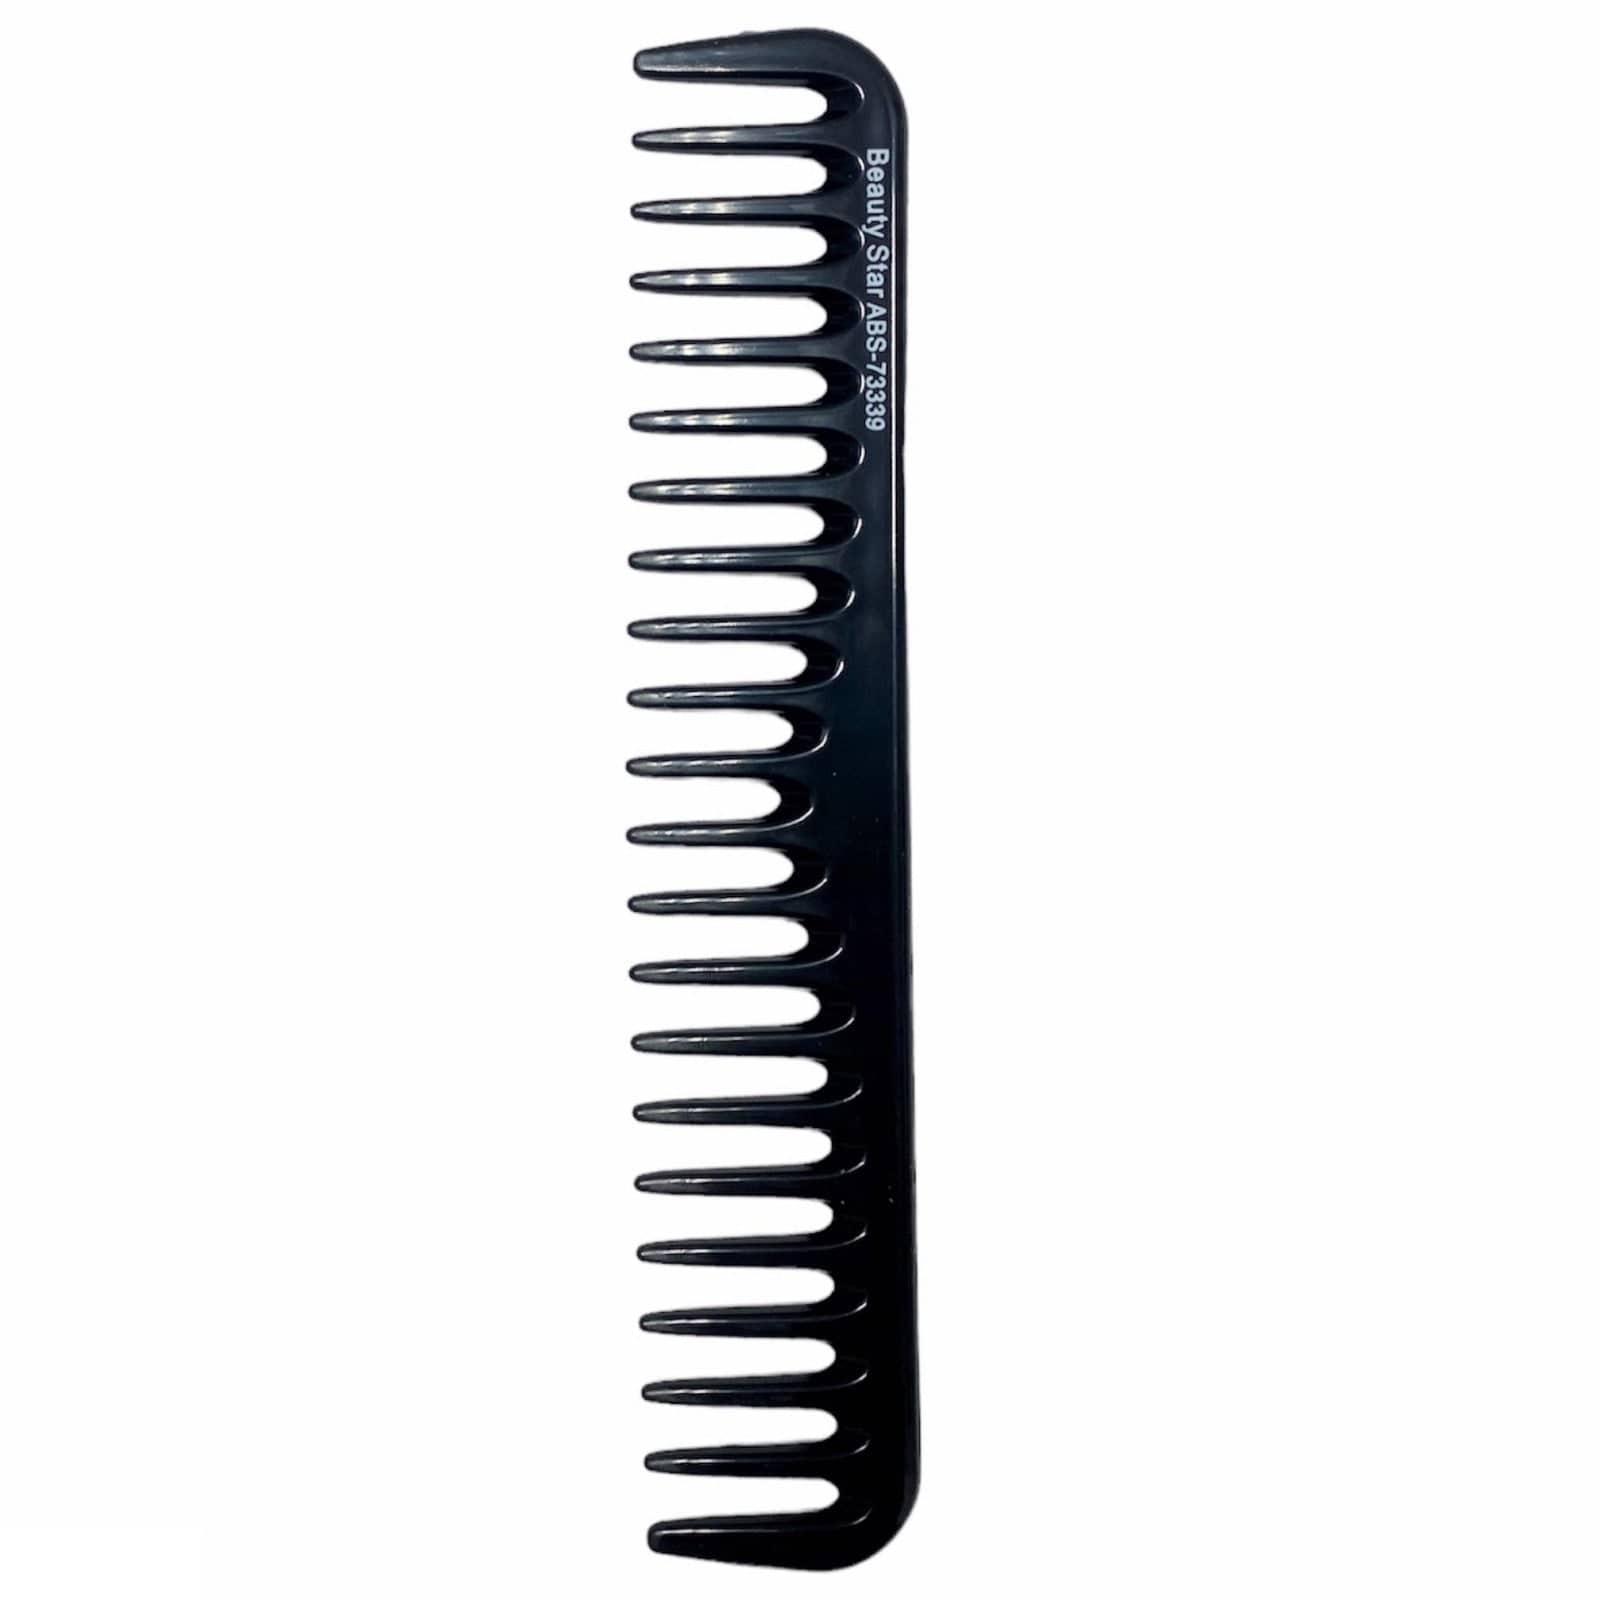 Globalstar Hair Styling Comb Black ABS-73339